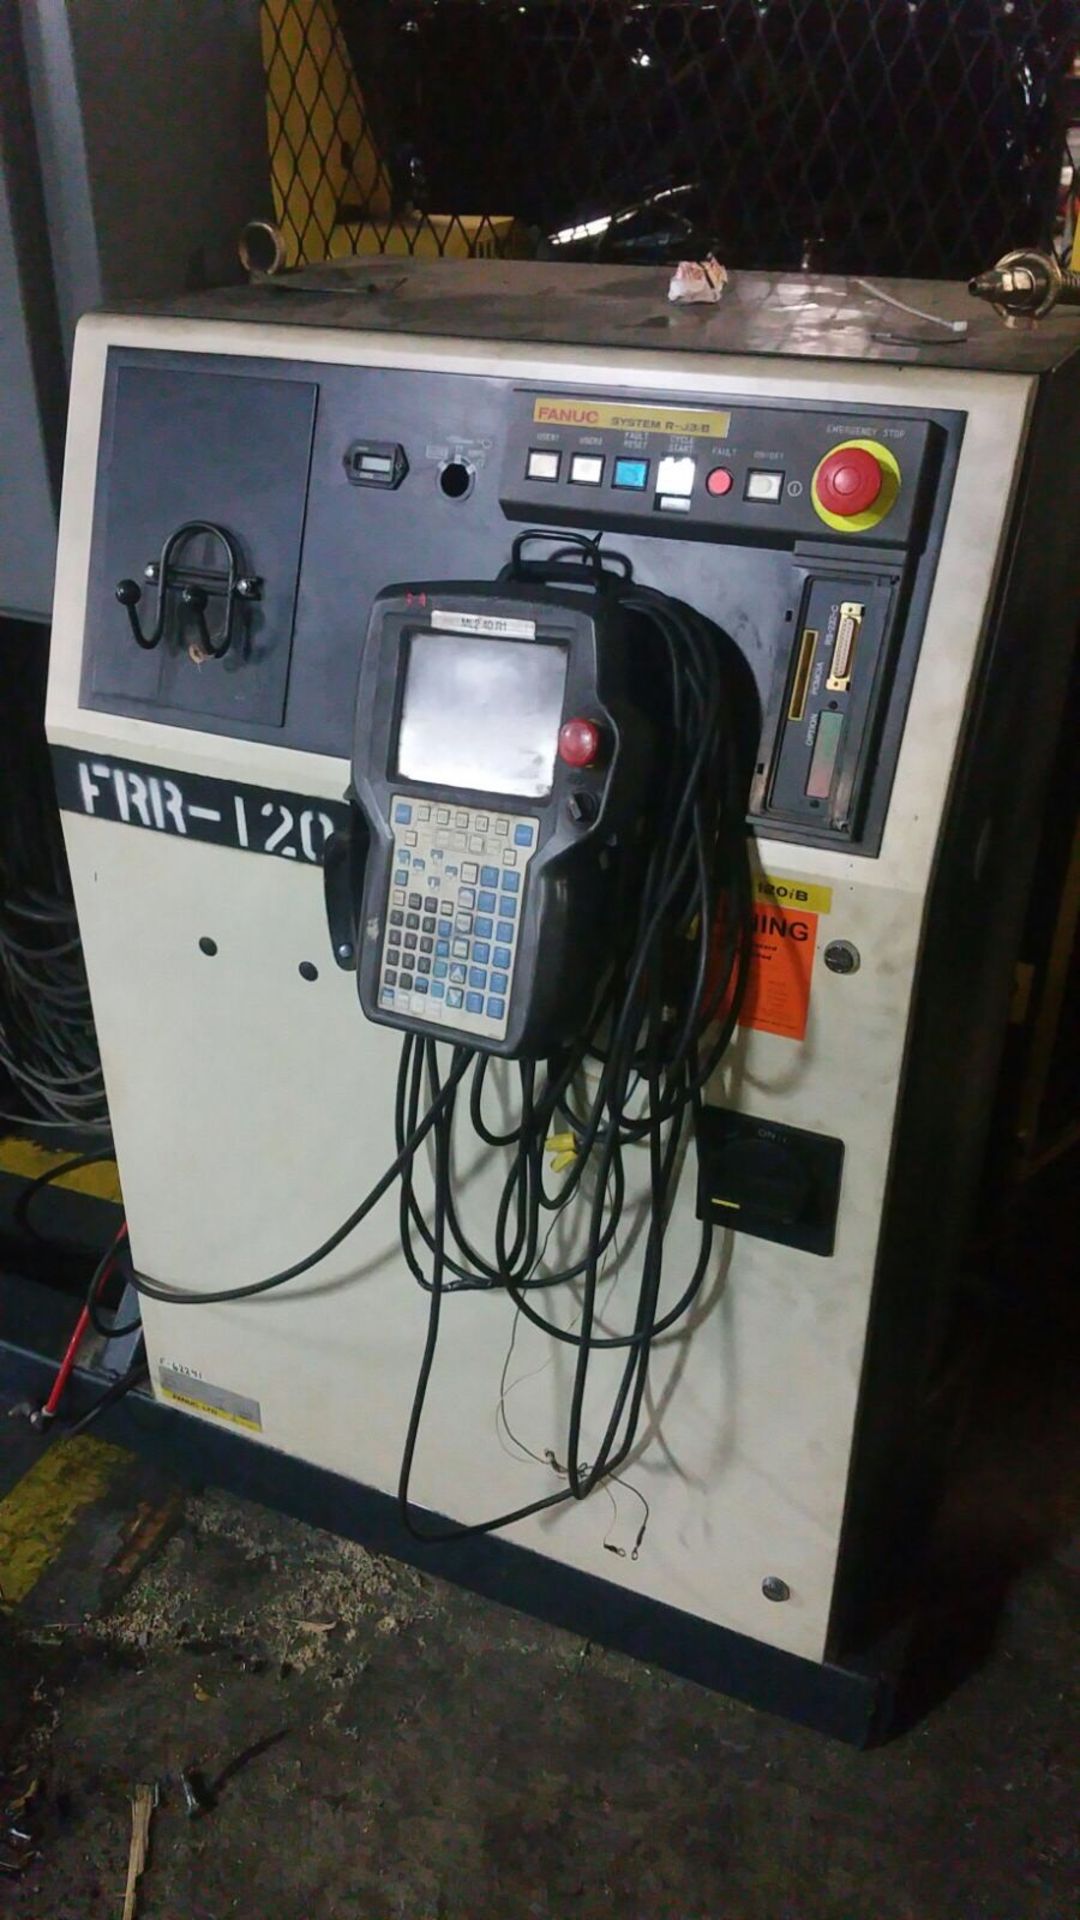 2005 FANUC ARCMATE 120iB W/R-J3iB CONTROLS, CABLES, TEACH PENDANT AND LINCOLN 455M POWER SUPPLY - Image 2 of 5